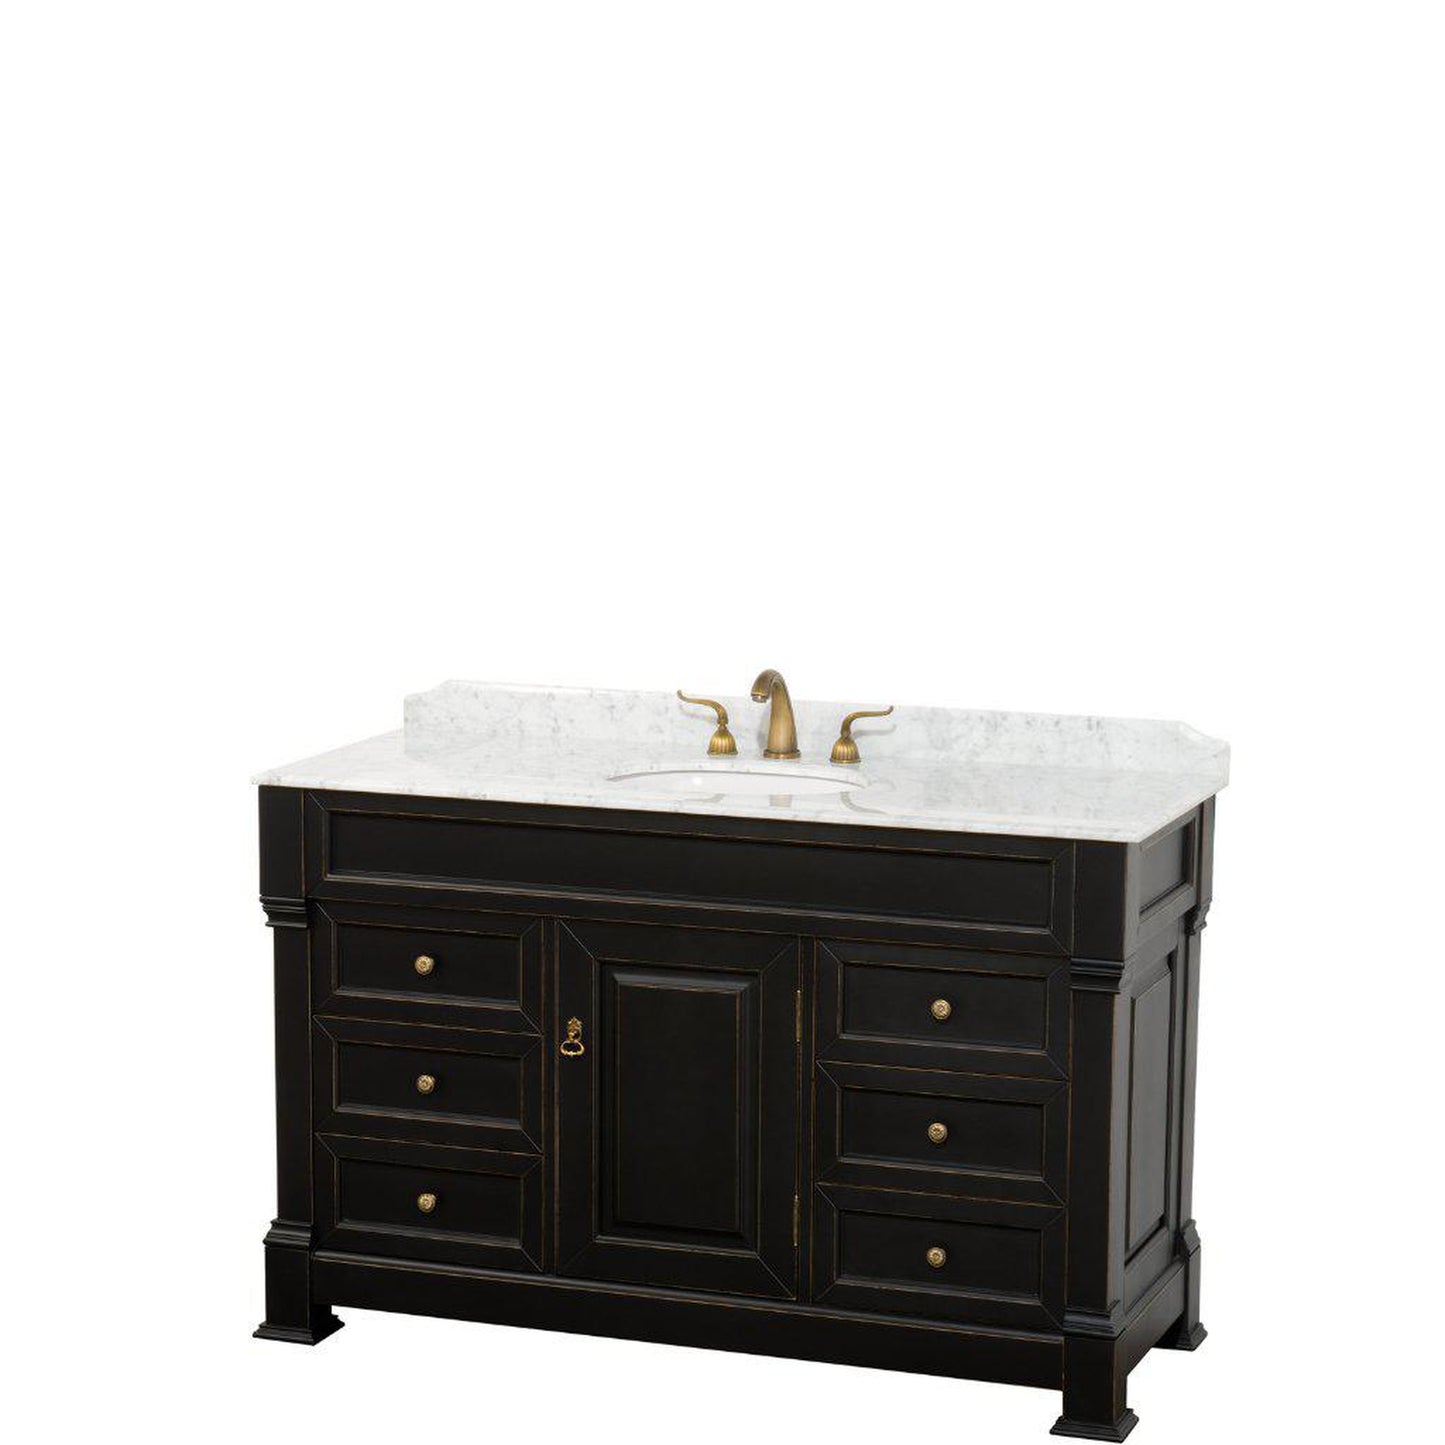 Wyndham Collection Andover 55" Single Bathroom Black Vanity Set With White Carrara Marble Countertop And Undermount Oval Sink, And No Mirror